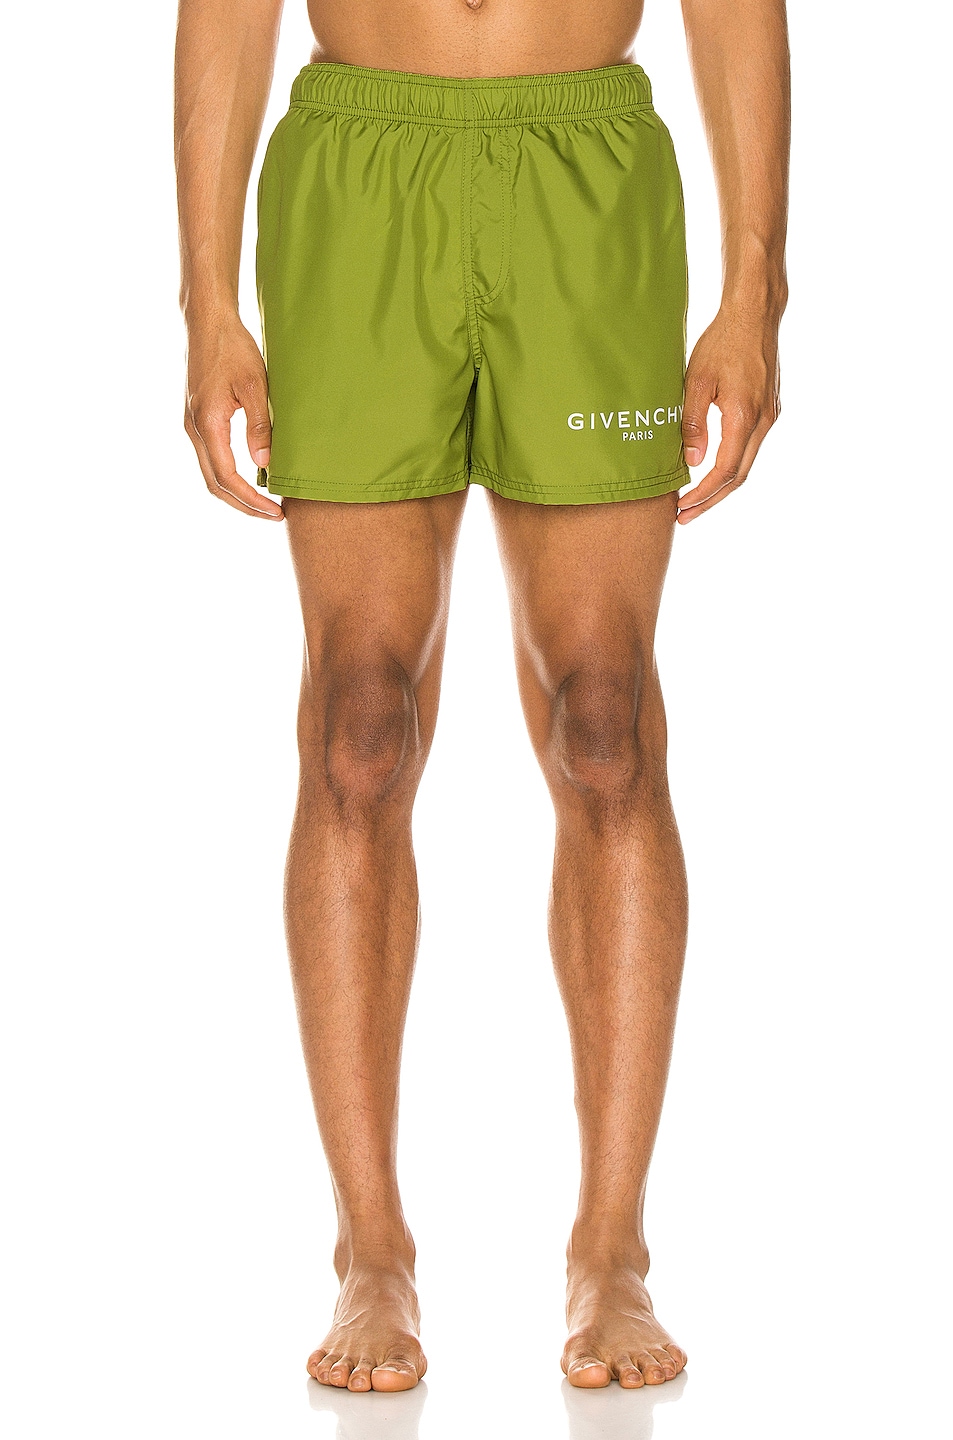 Givenchy Technical Swim Trunks in Olive Green | FWRD